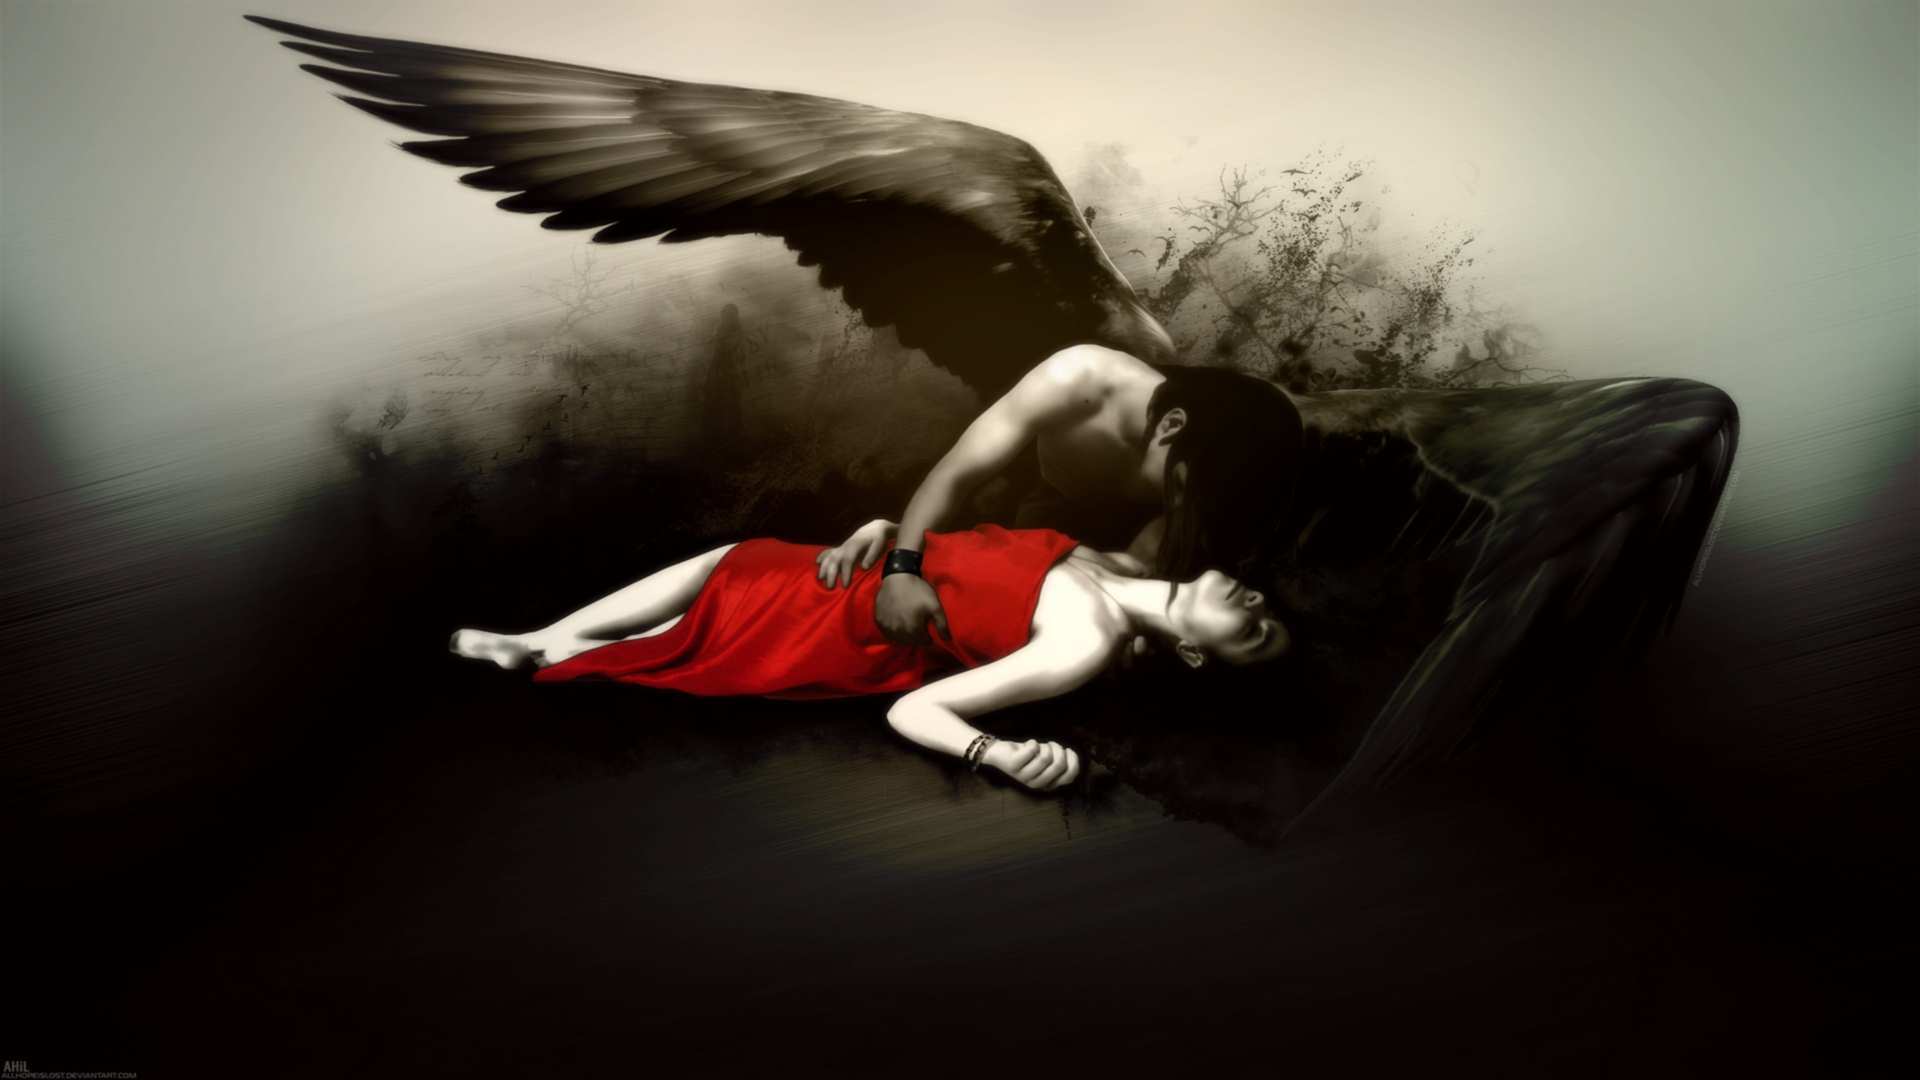 Grief of an Angel HD Wallpaper. Background Image